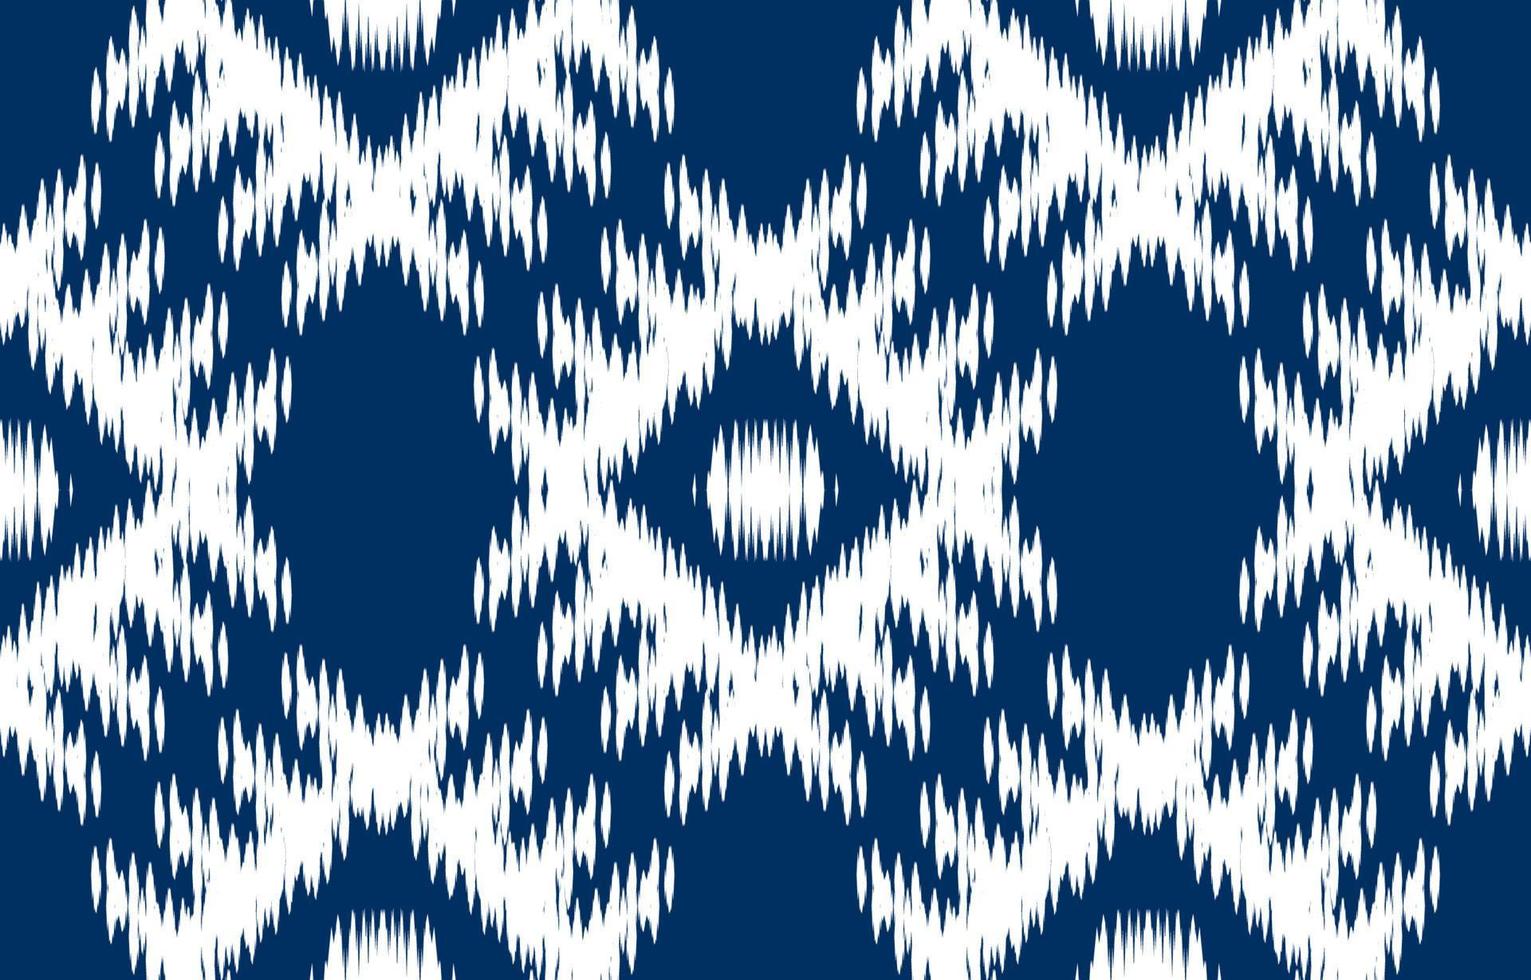 white and blue ikat ethnic design background. Seamless ikat floral pattern in tribal, folk embroidery abstract art. art ornament print.Design for carpet, wallpaper, clothing, wrapping, fabric fashion vector